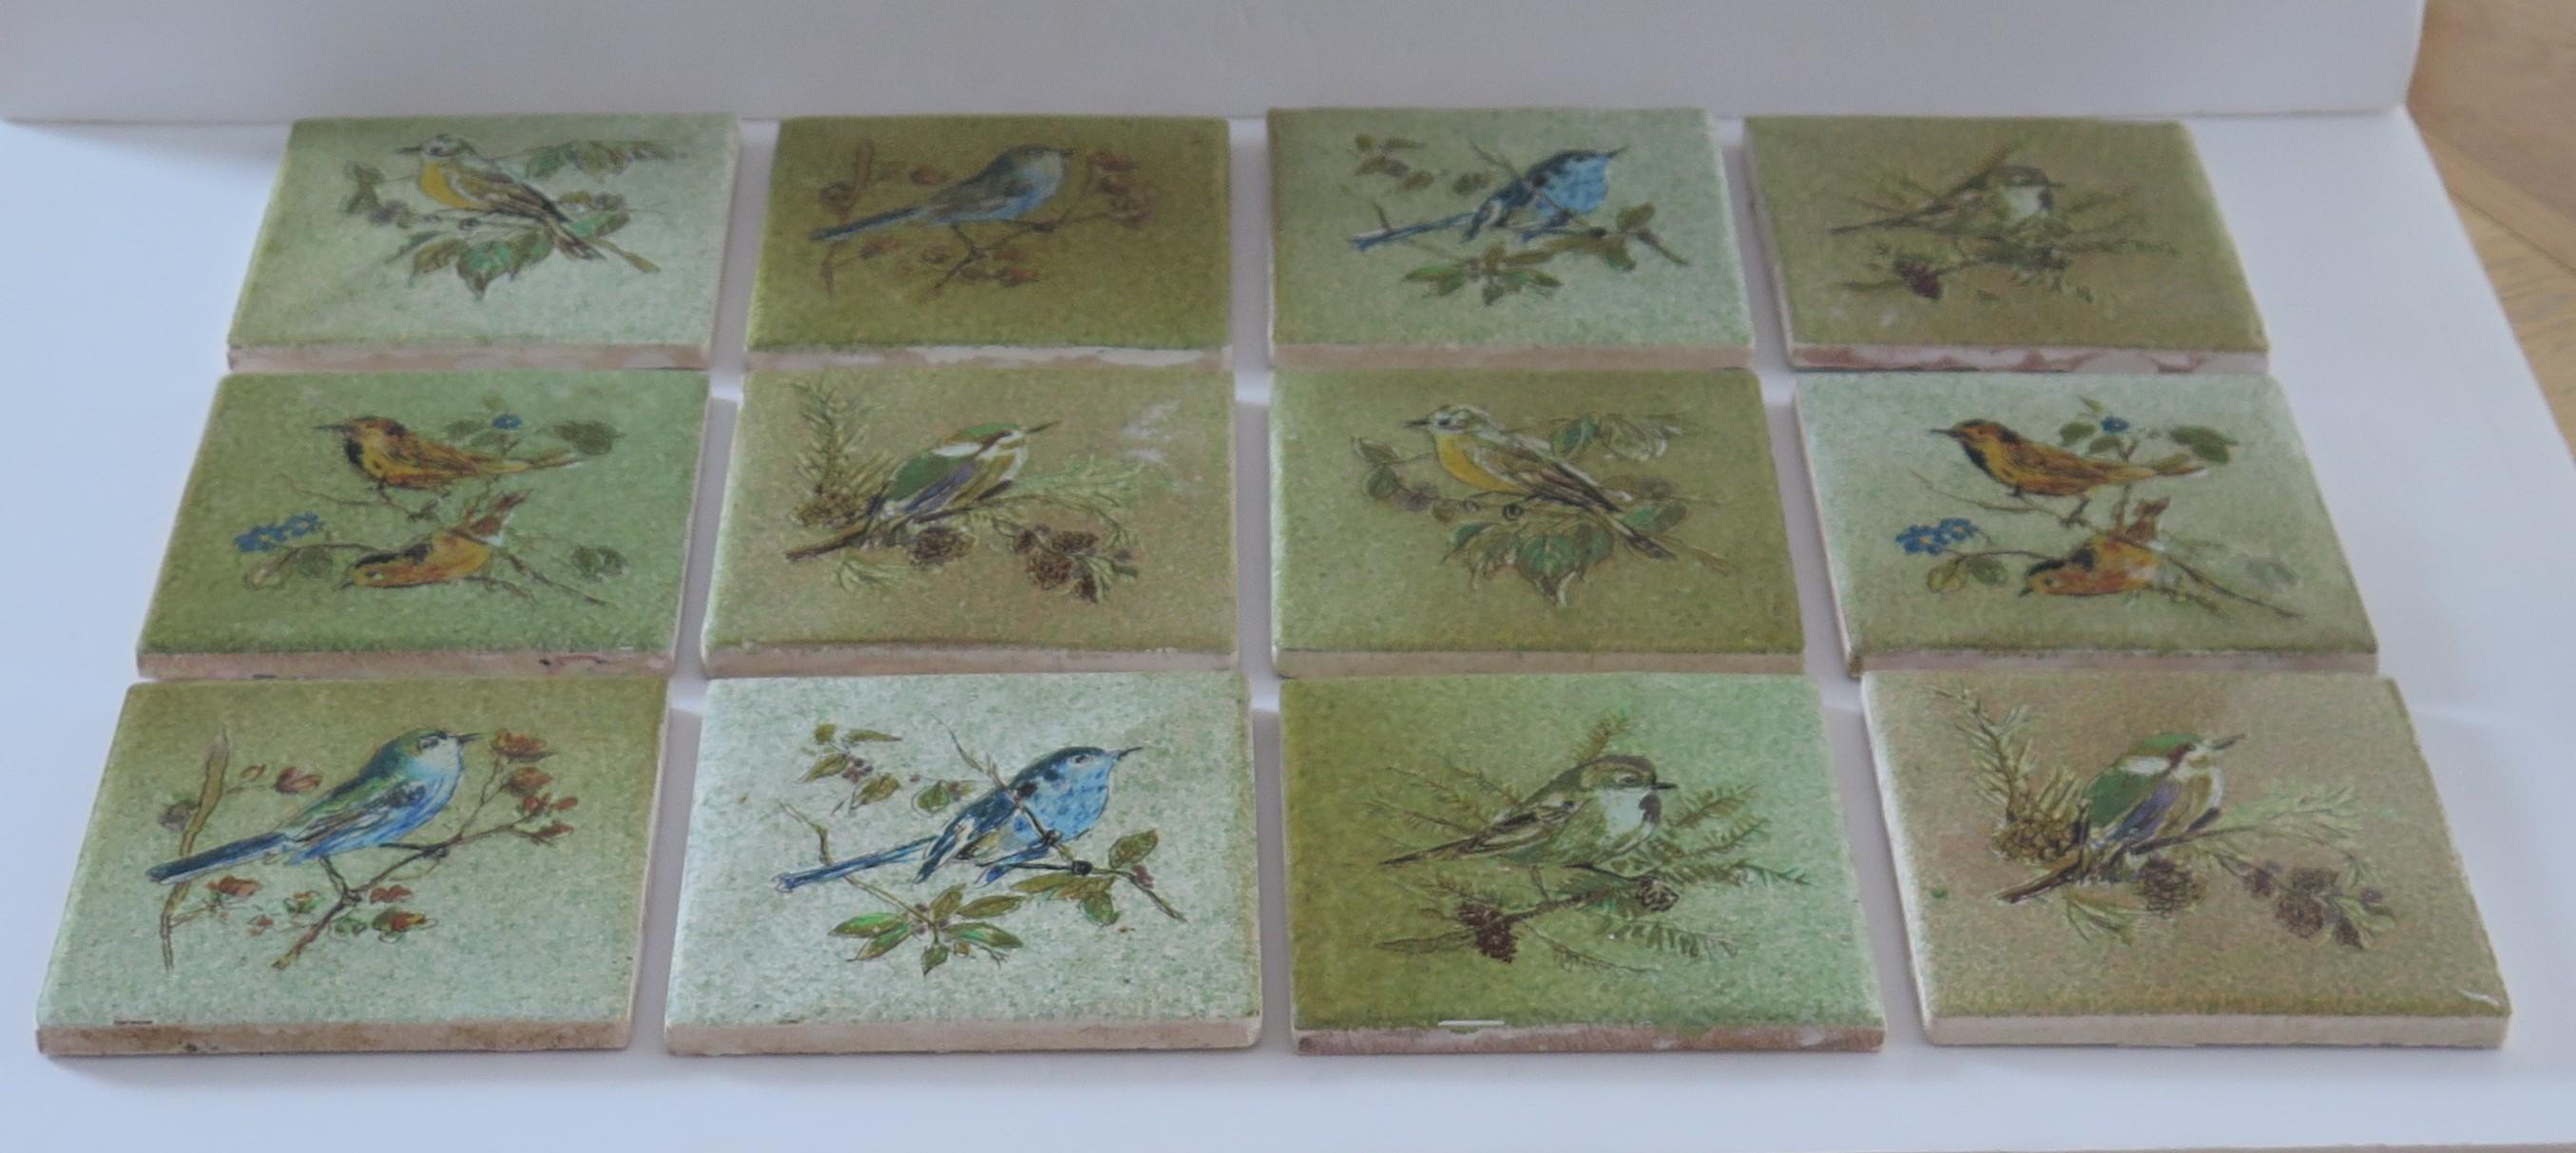 These are a good set of twelve glazed ceramic wall tiles, hand enamelled with a bird theme, probably over an underglaze printed outline and dating to the mid-20th century, circa 1930. 

Each tile is nominally 4.25 inches ( 11cm) square. There are